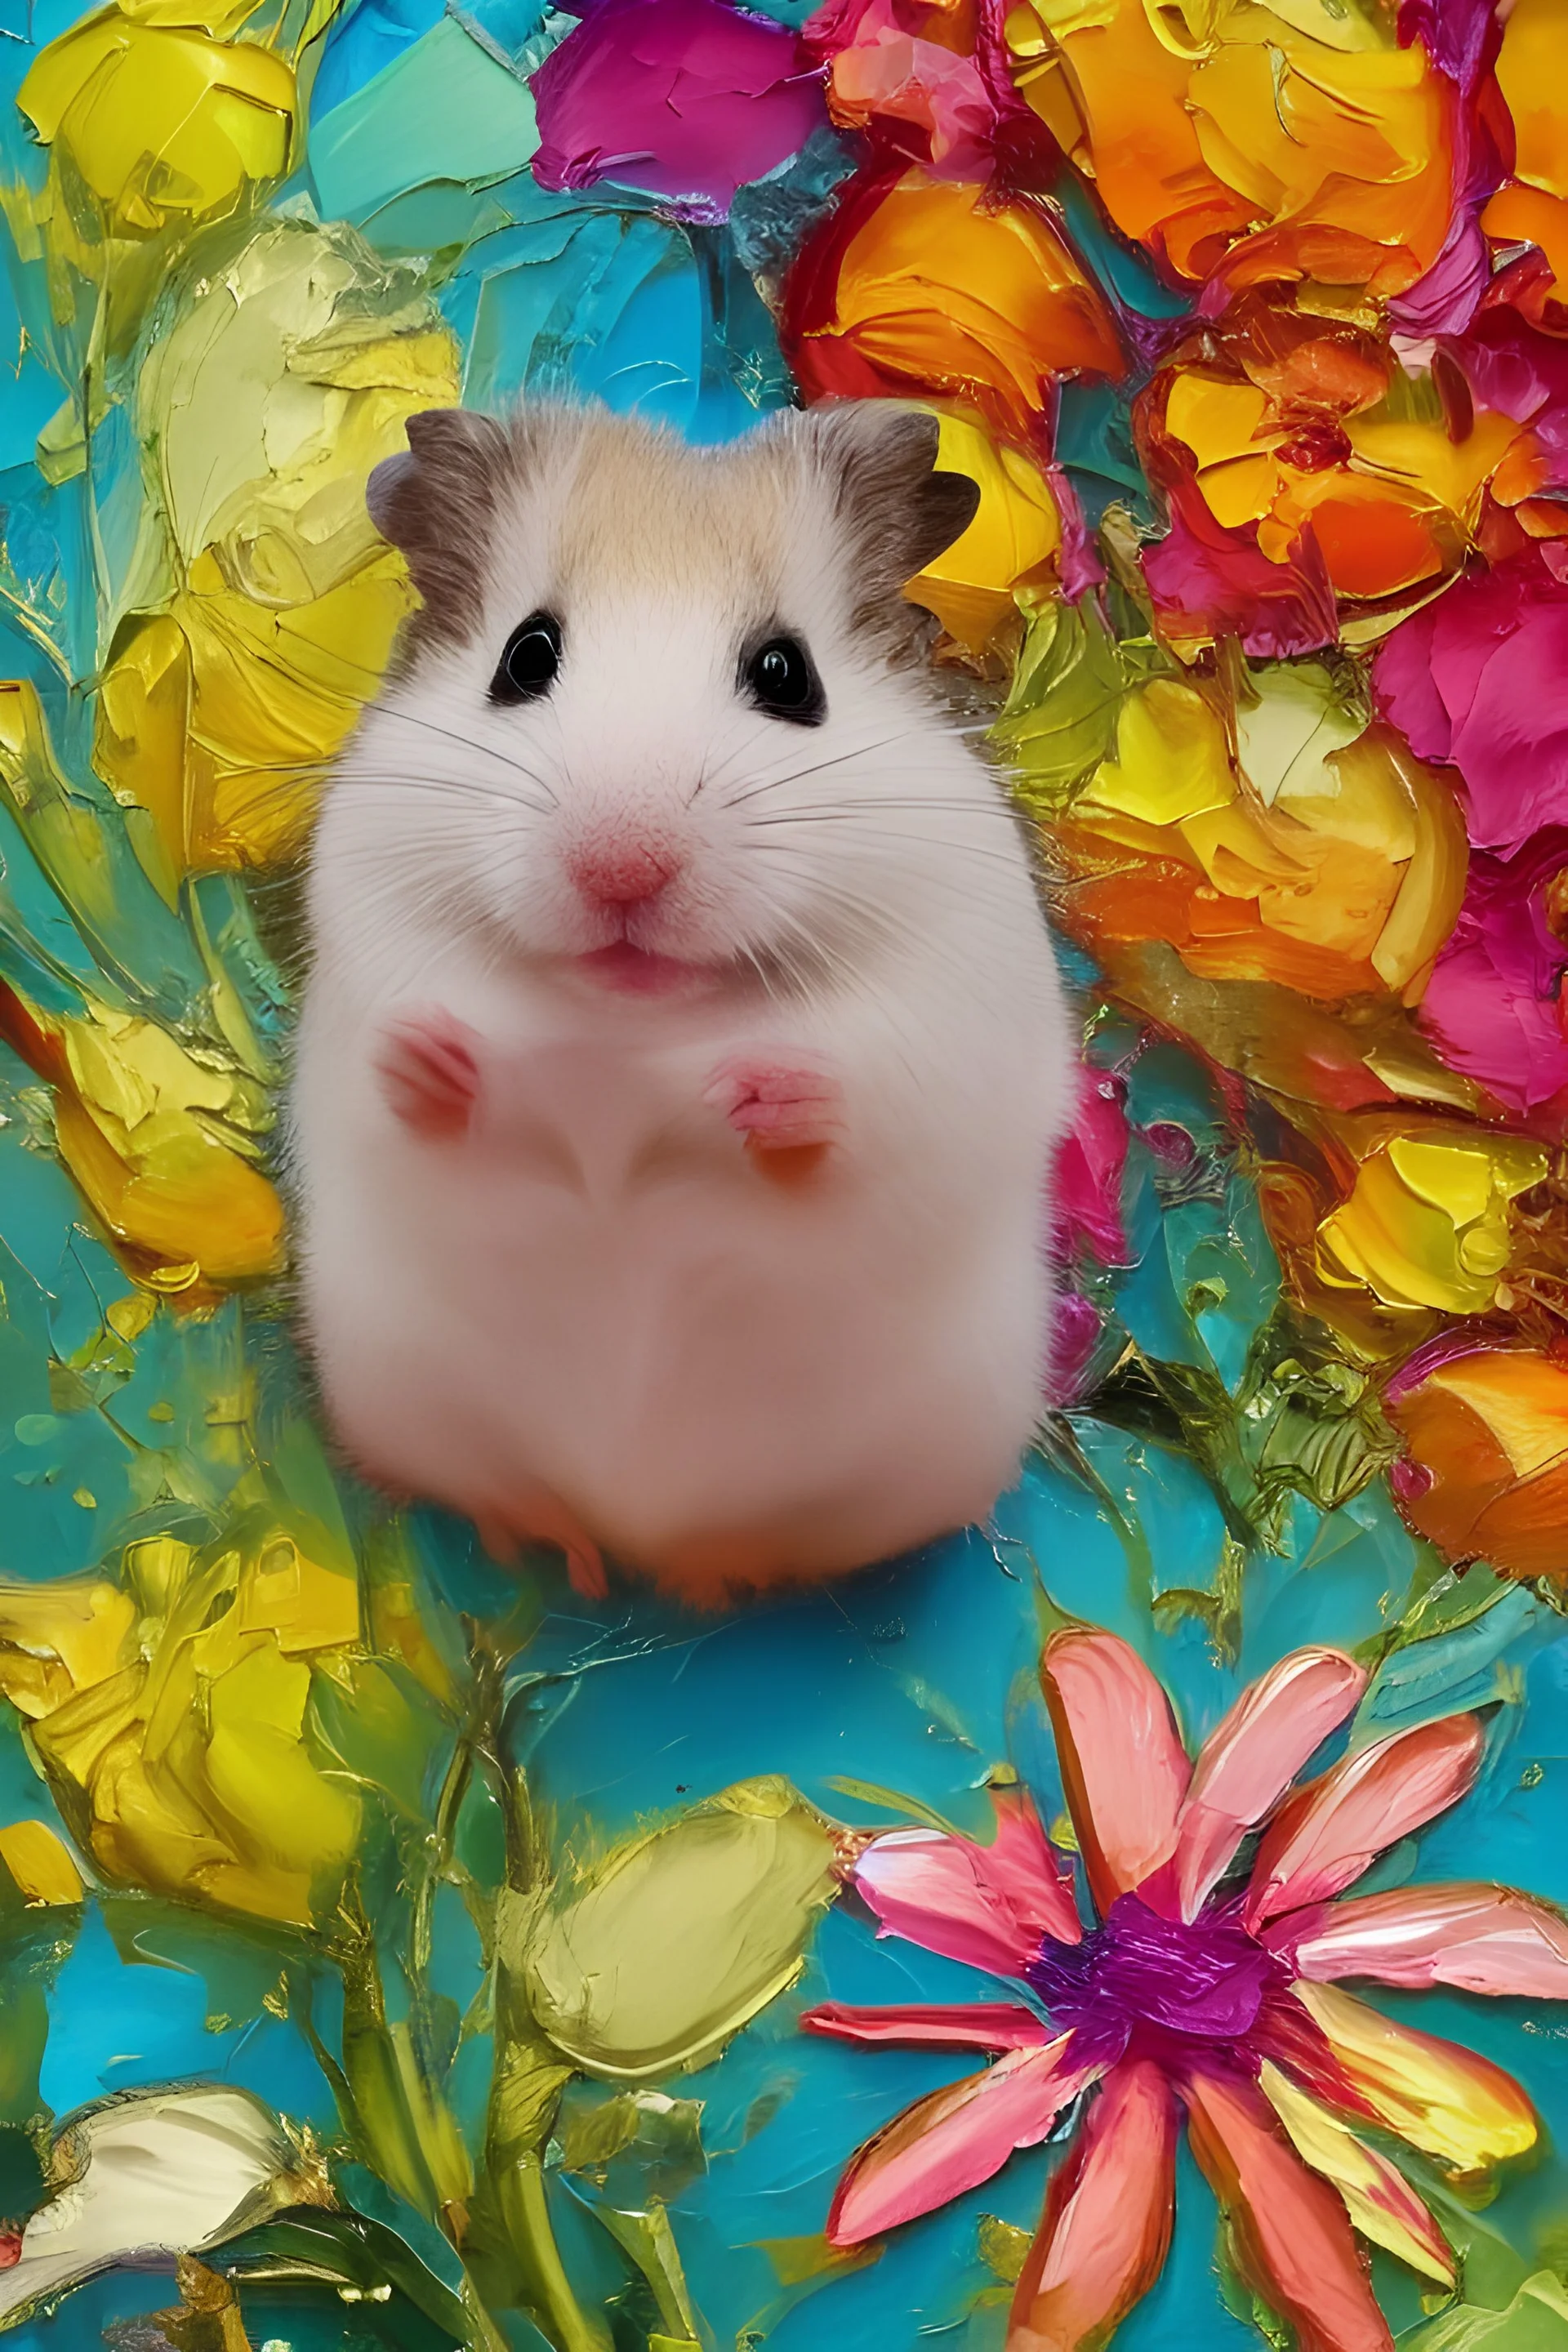 (adorable hamster) surrounded by (colorful flowers) ; warm lighting ; thick metallic brushstrokes ; artistic dripping glossy metallic gauche painting (distorted face) ; ((ugly)) ; ((text)) ; ((artist signature)) ; (((white border))) ; (disfigured) ; deformed ; low resolution ; ((blurry)) ; blurred ; (out of focus) ; (out of frame) ; (poorly cropped) ; mutation ; mutated ; (bad anatomy) ; ((logo)) ; ((watermark)) ; (extra limb) ; (missing limb) ; (floating limbs) ; (disconnected limbs) ; grainy ;